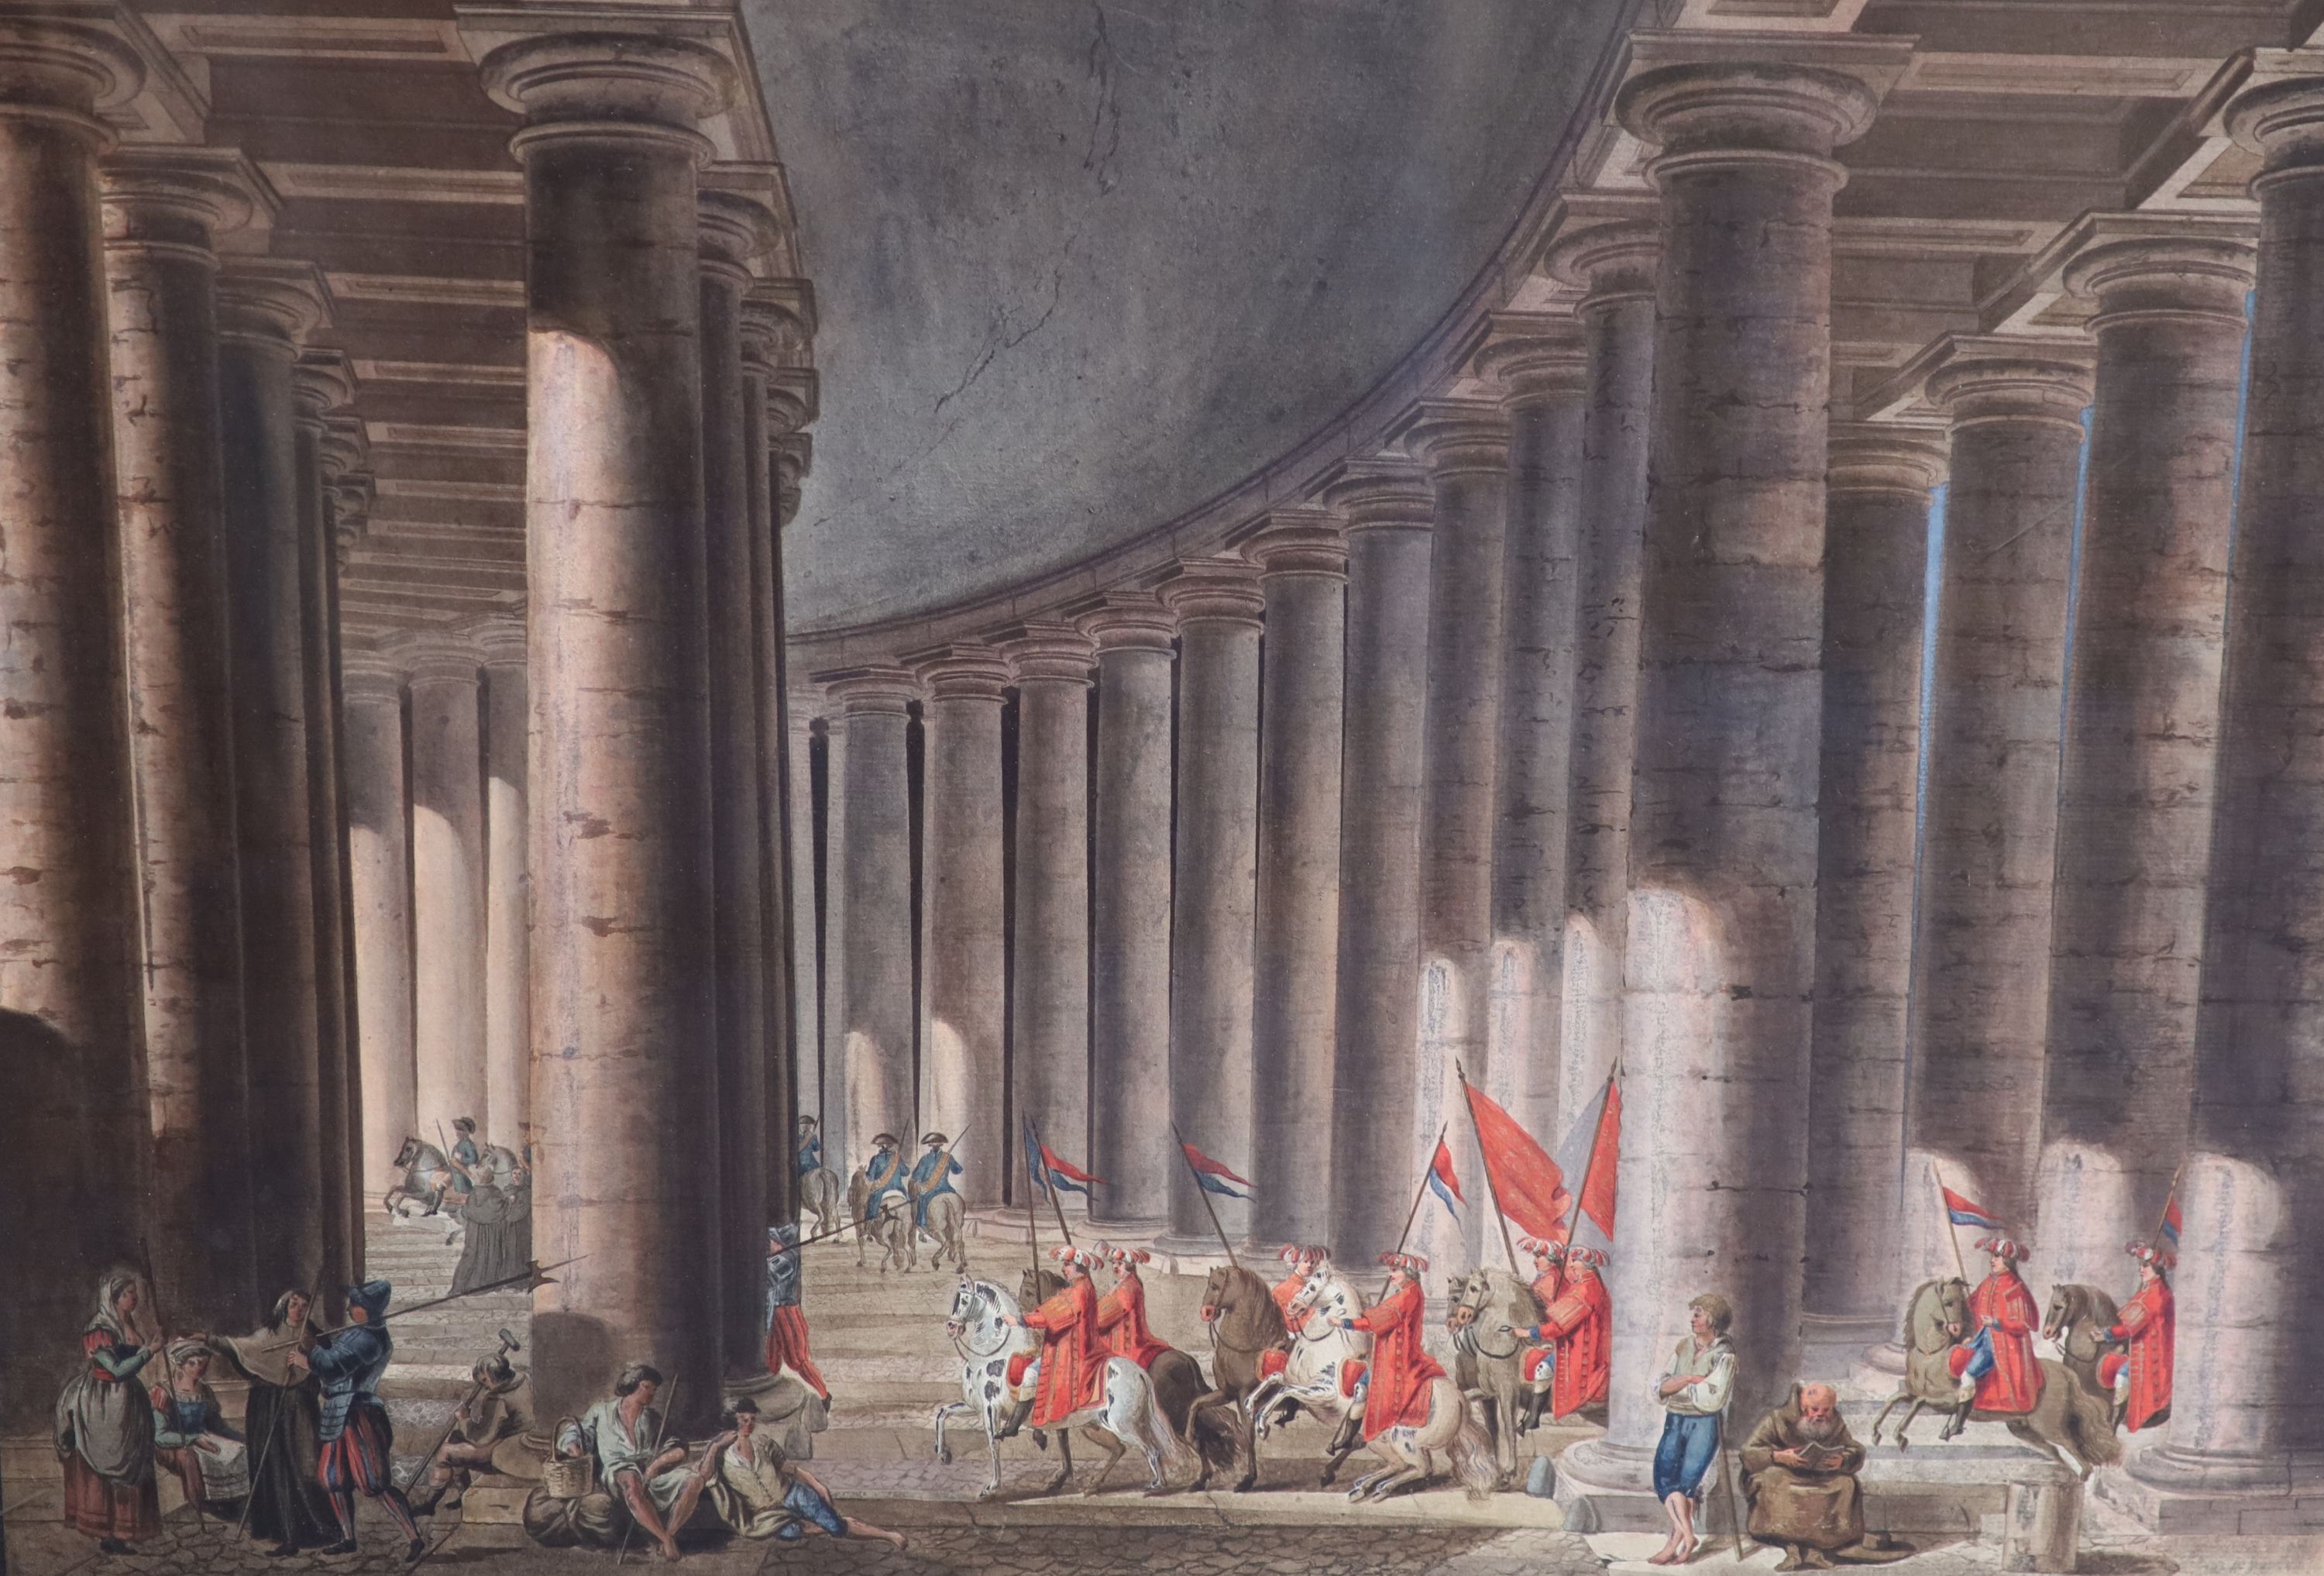 Italian School c.1800 , The Pope in Procession from St Peter's Square, through the Colonnades into the Basilica, set of four outlined engravings extensively hand coloured in watercolour, largest 46 x 69.5cm